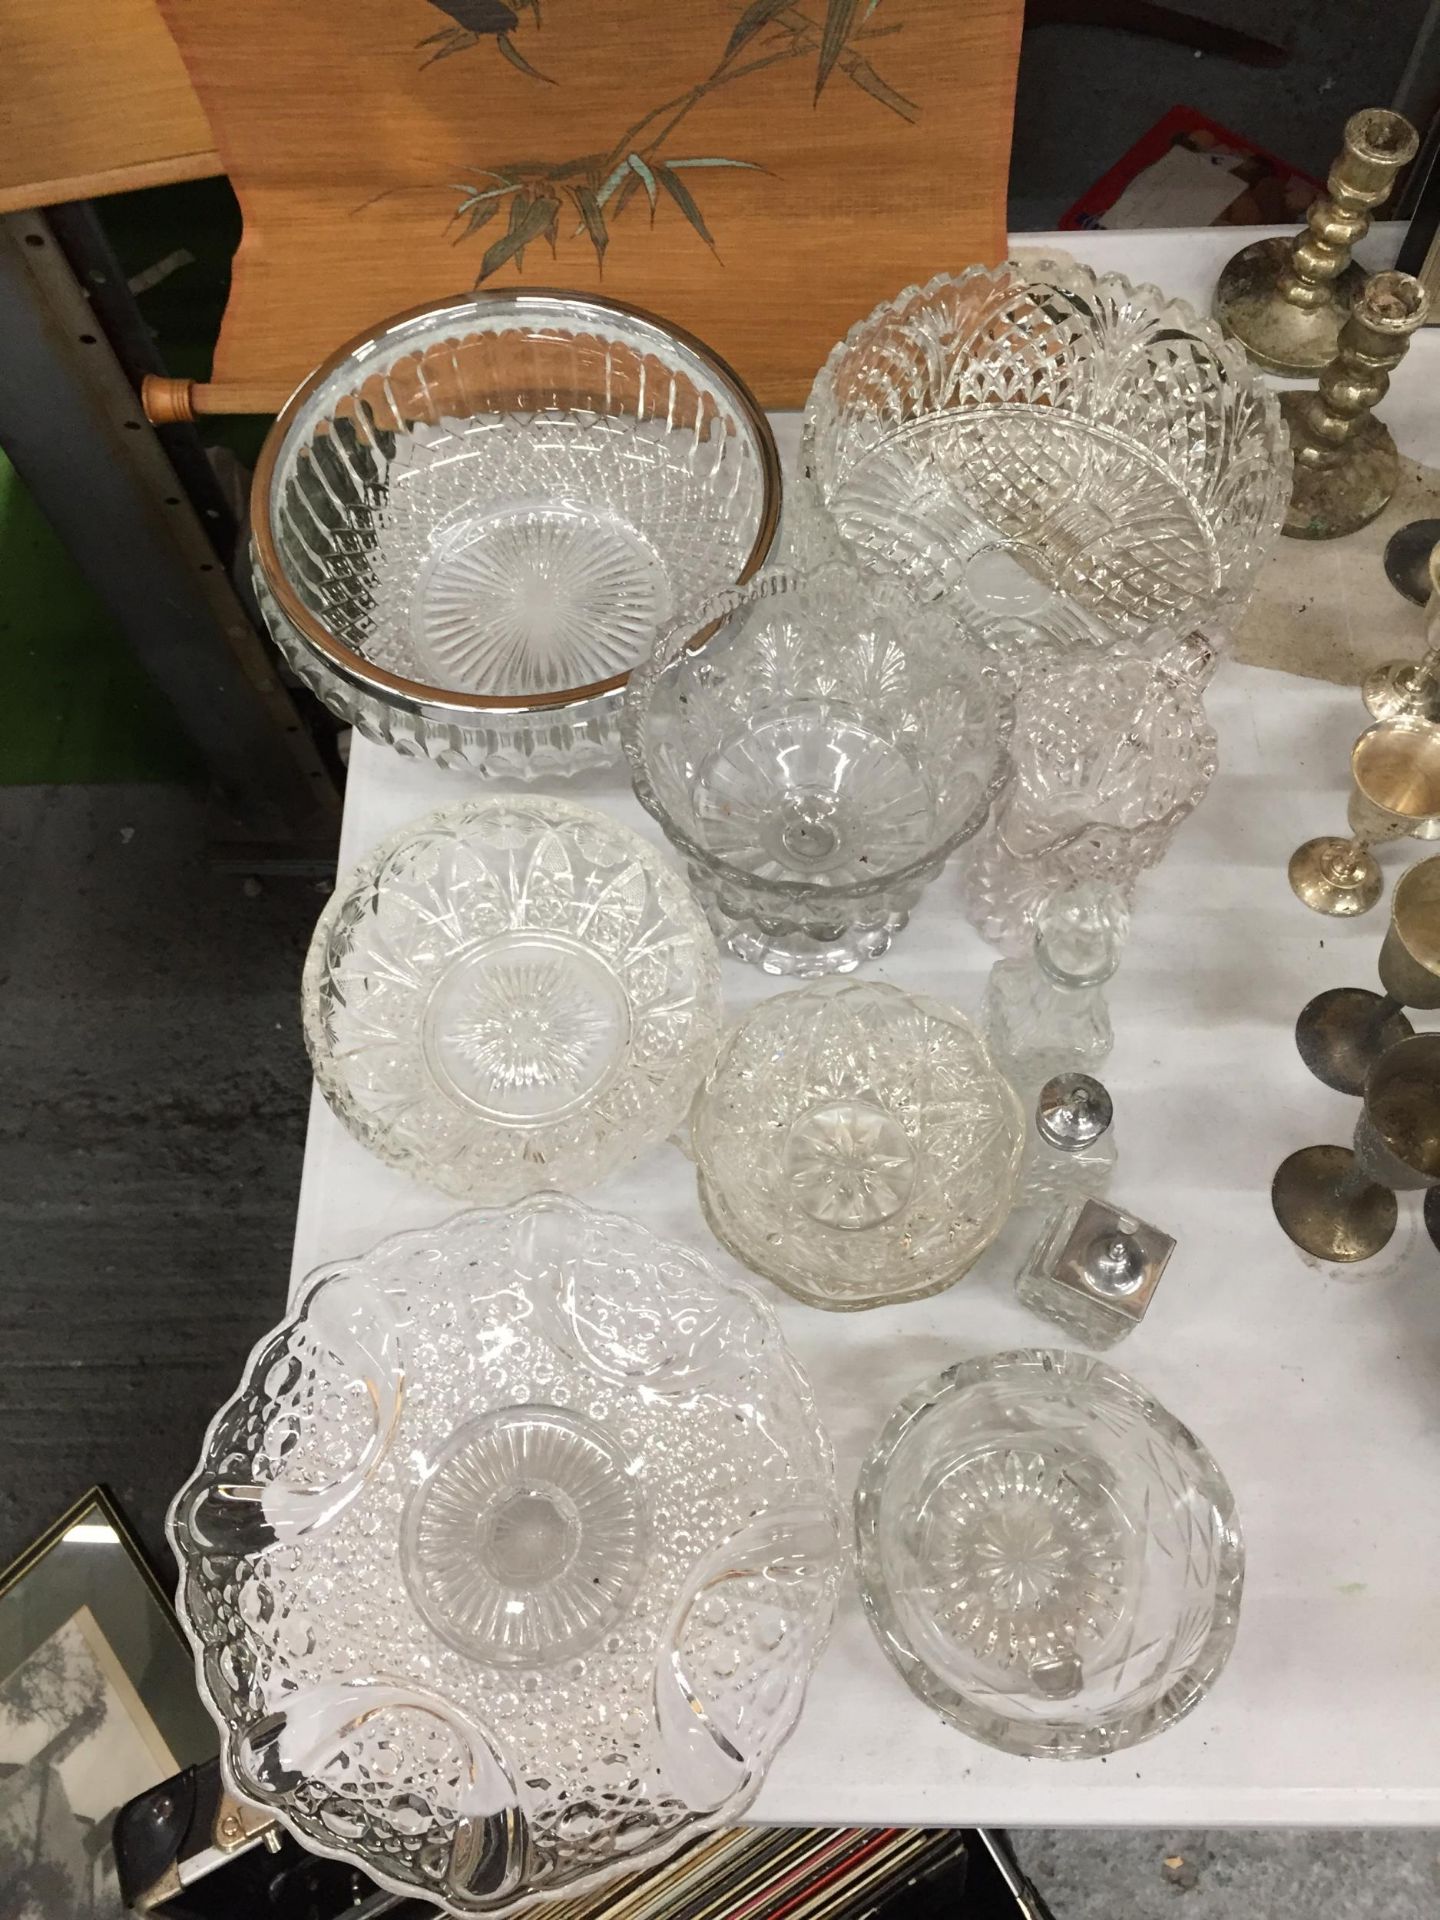 A MIXED COLLECTION OF VINTAGE CUT AND FURTHER GLASS ITEMS, BOWLS ETC - Image 3 of 3